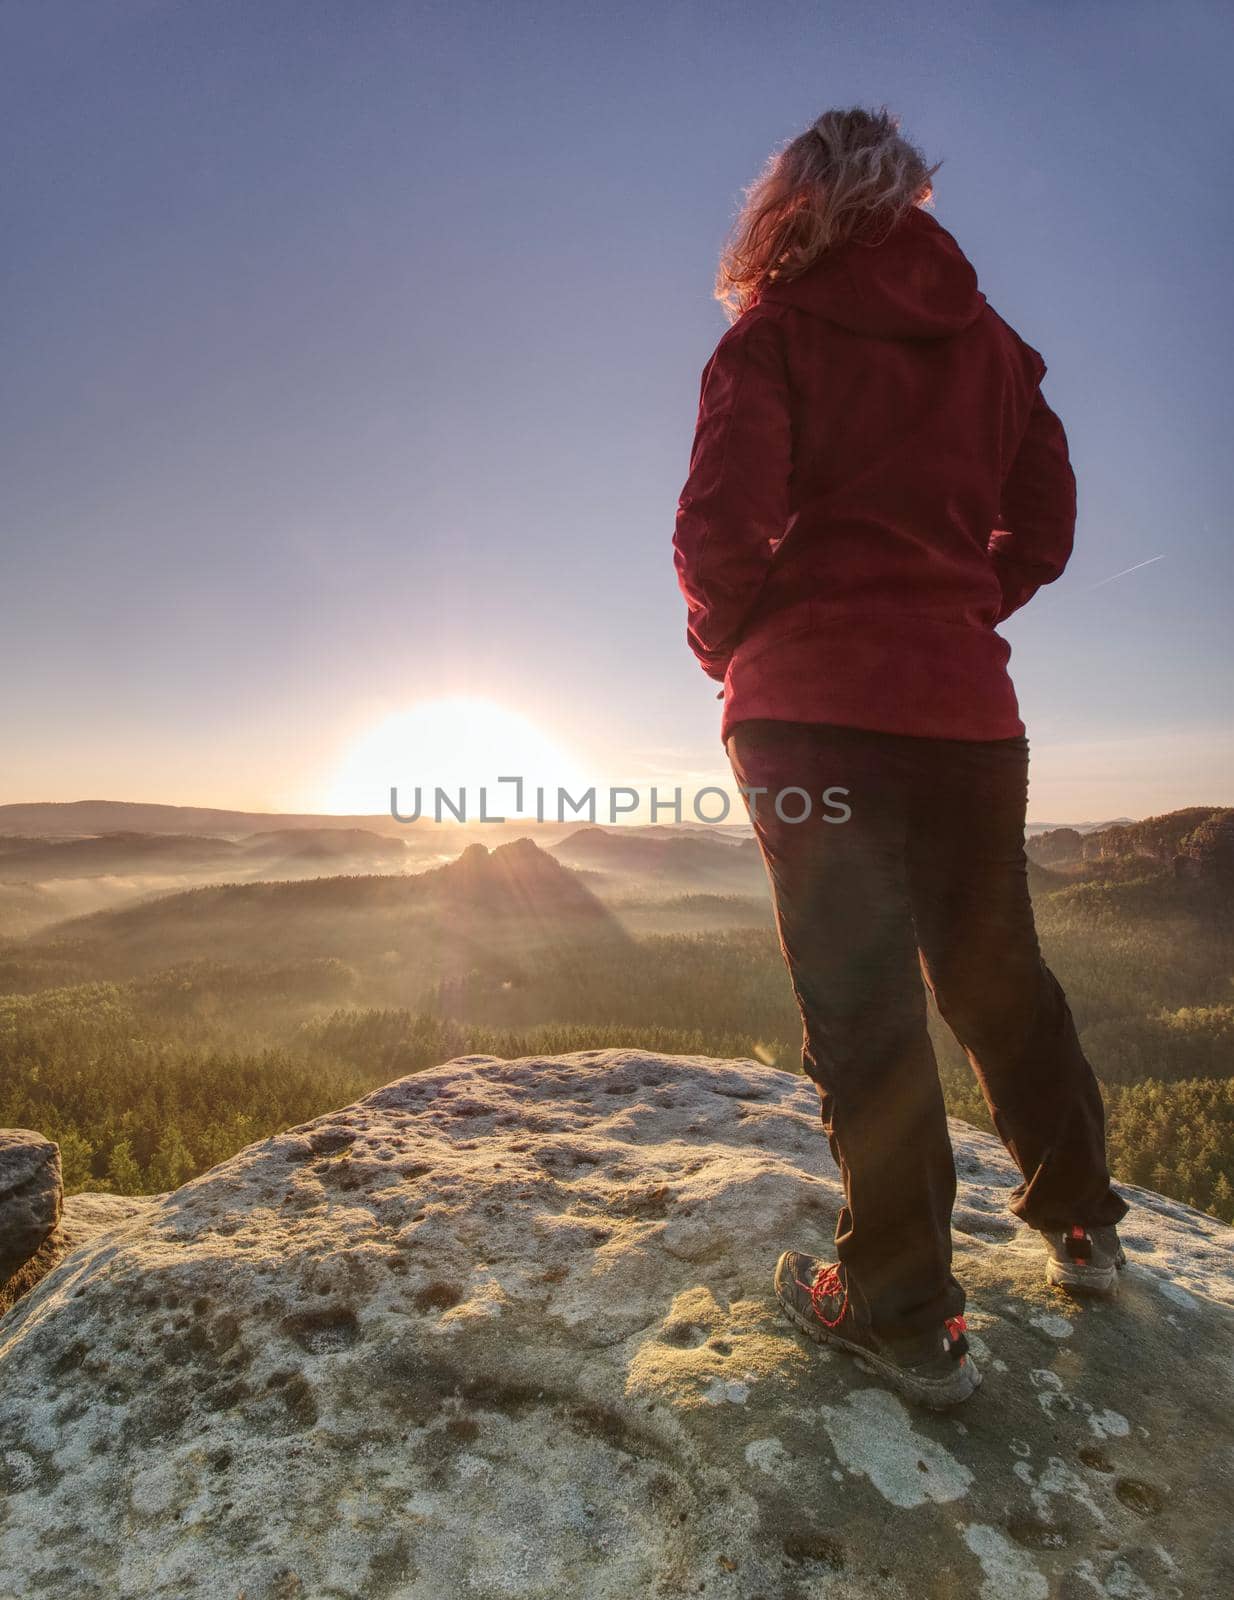 Blond girl with hands in jacket pockets hiking in mountains by rdonar2